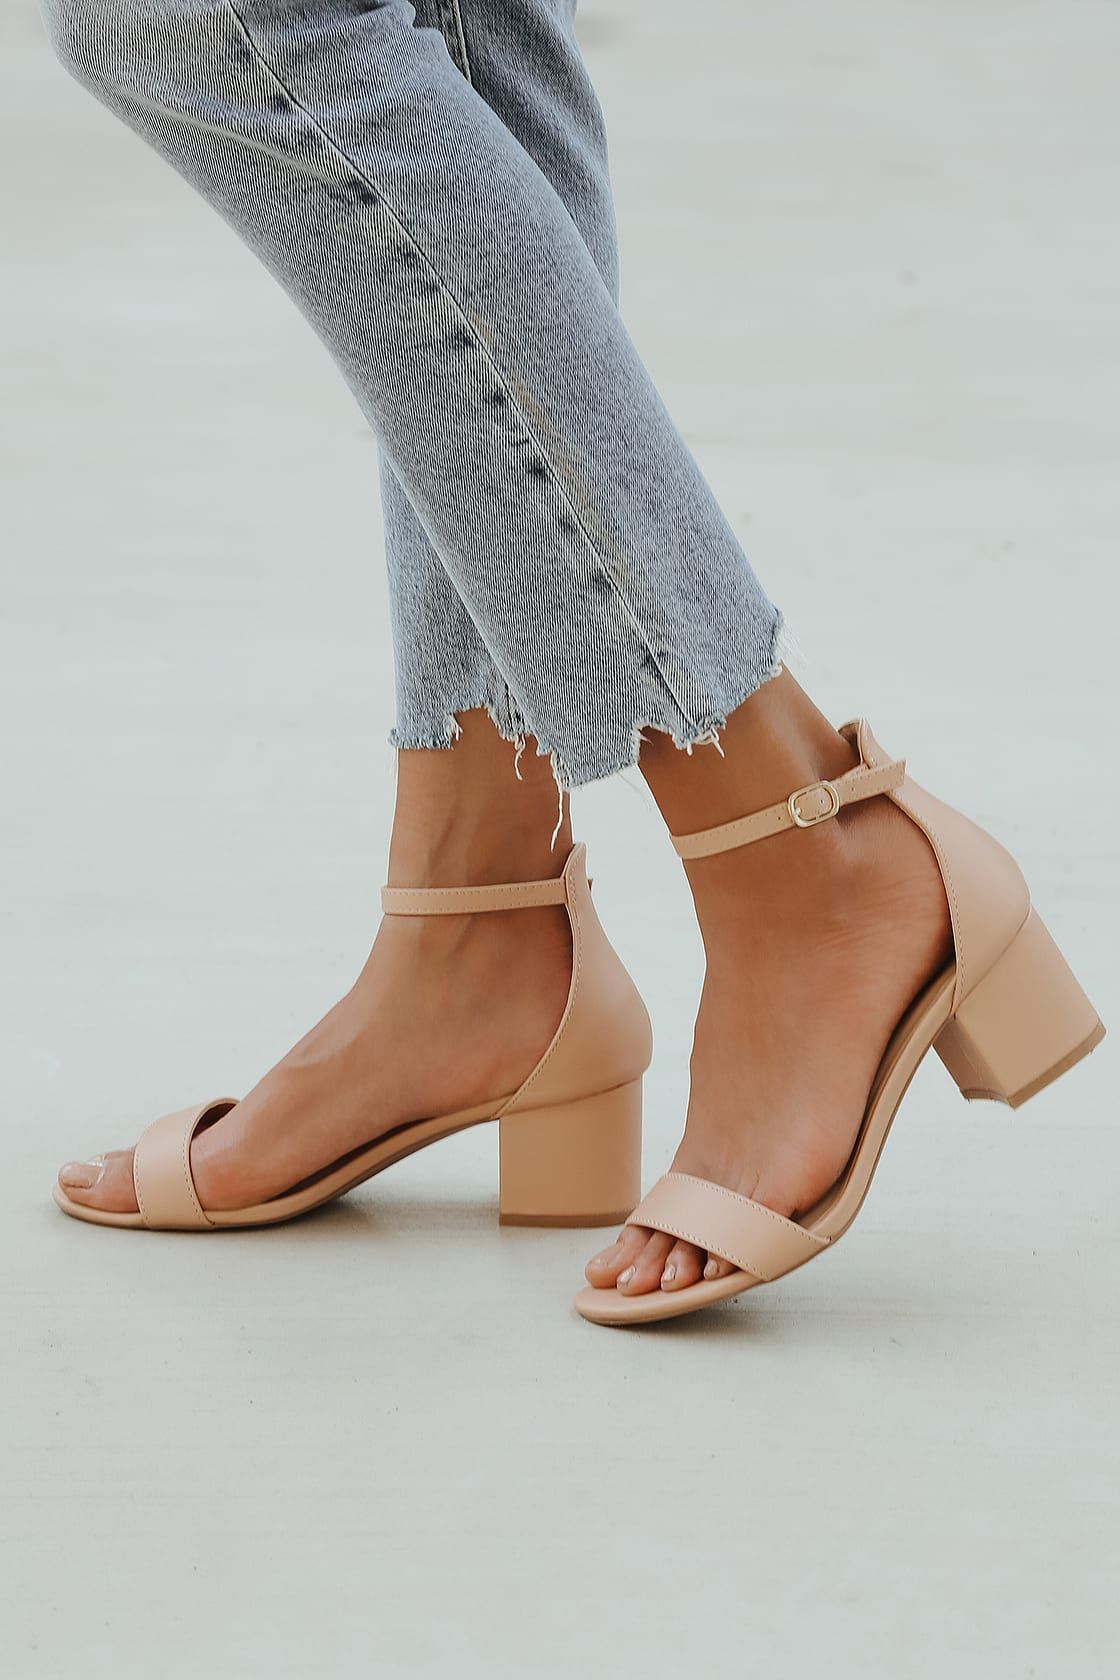 30 Most Comfortable High - Comfy Heeled Shoes Women